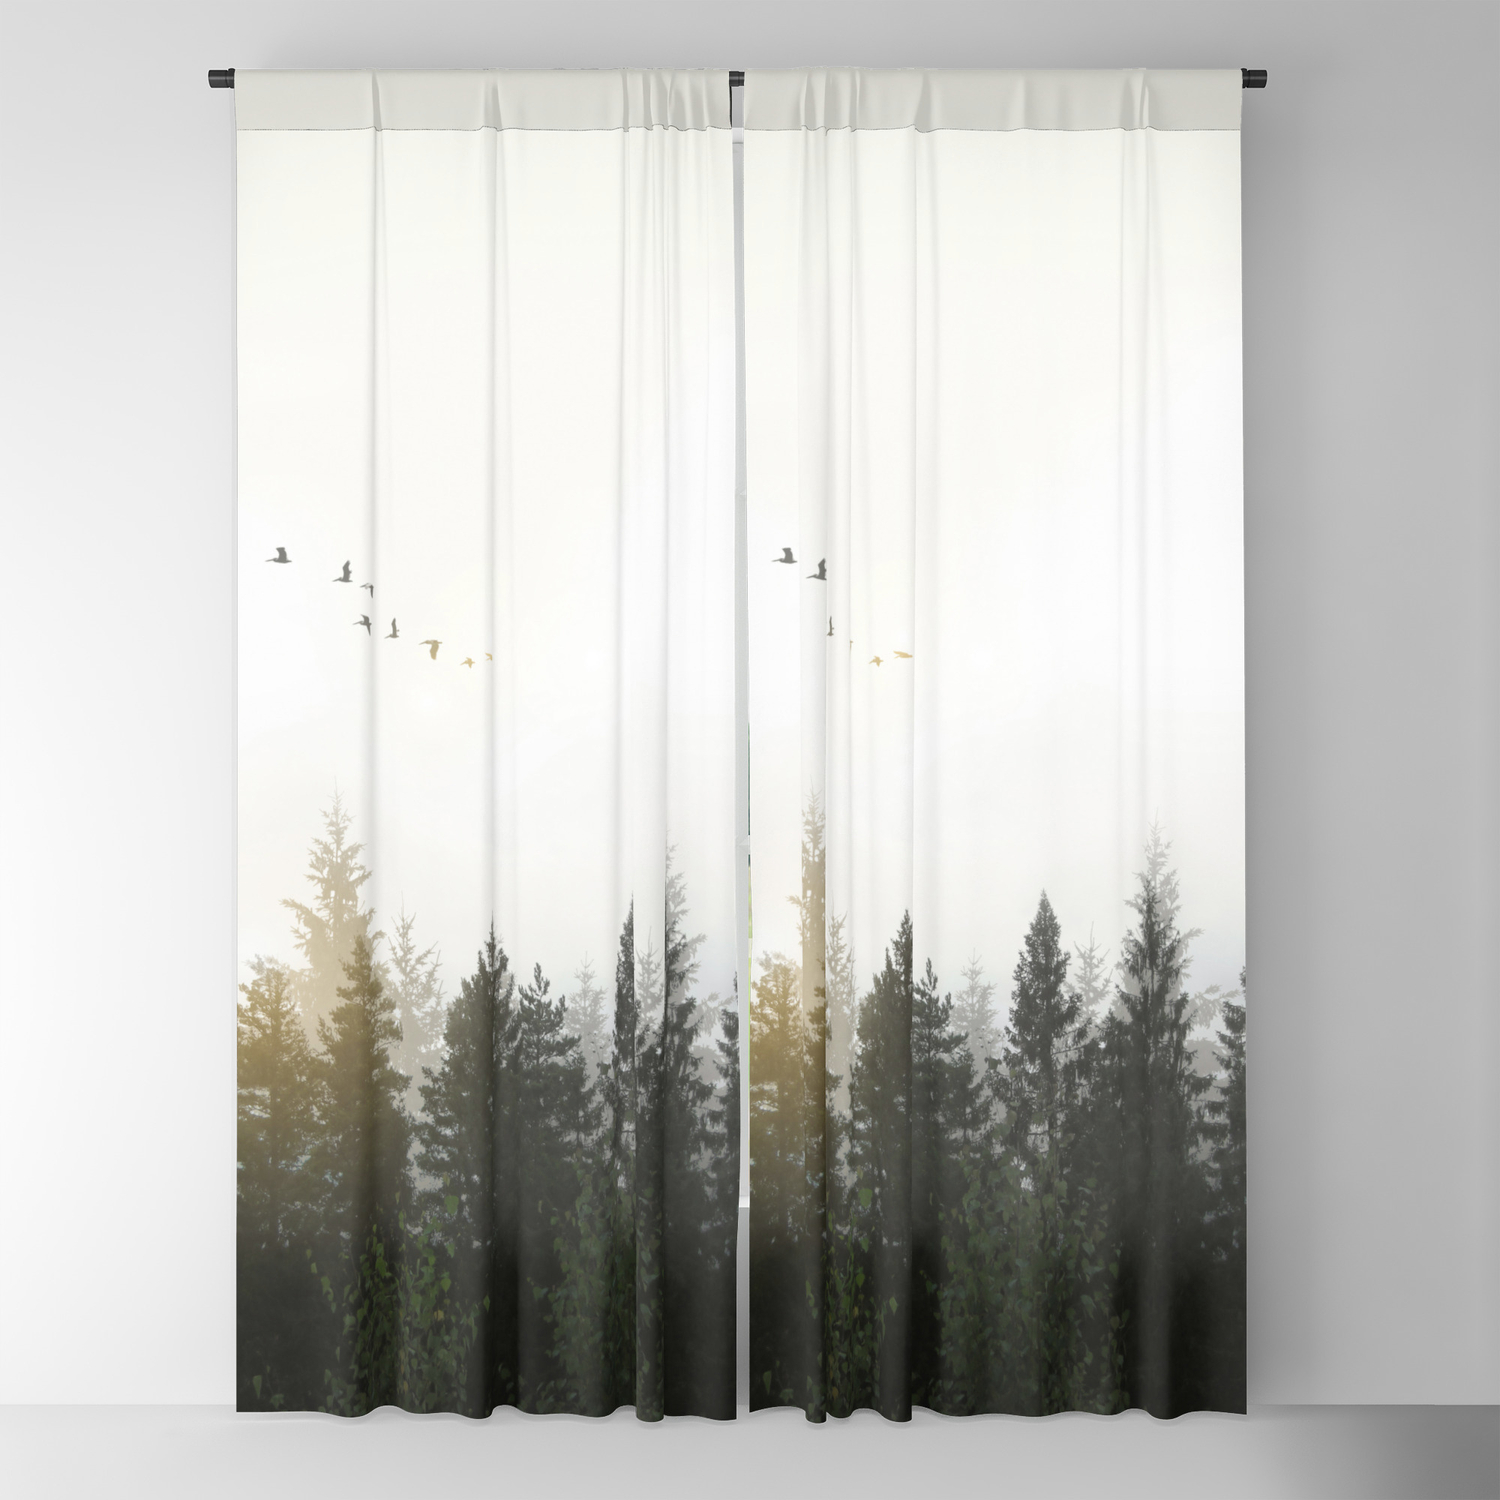 Early Morning Foggy Forest 3D Window Fabric Curtain Darkening Blockout 2 Panels 